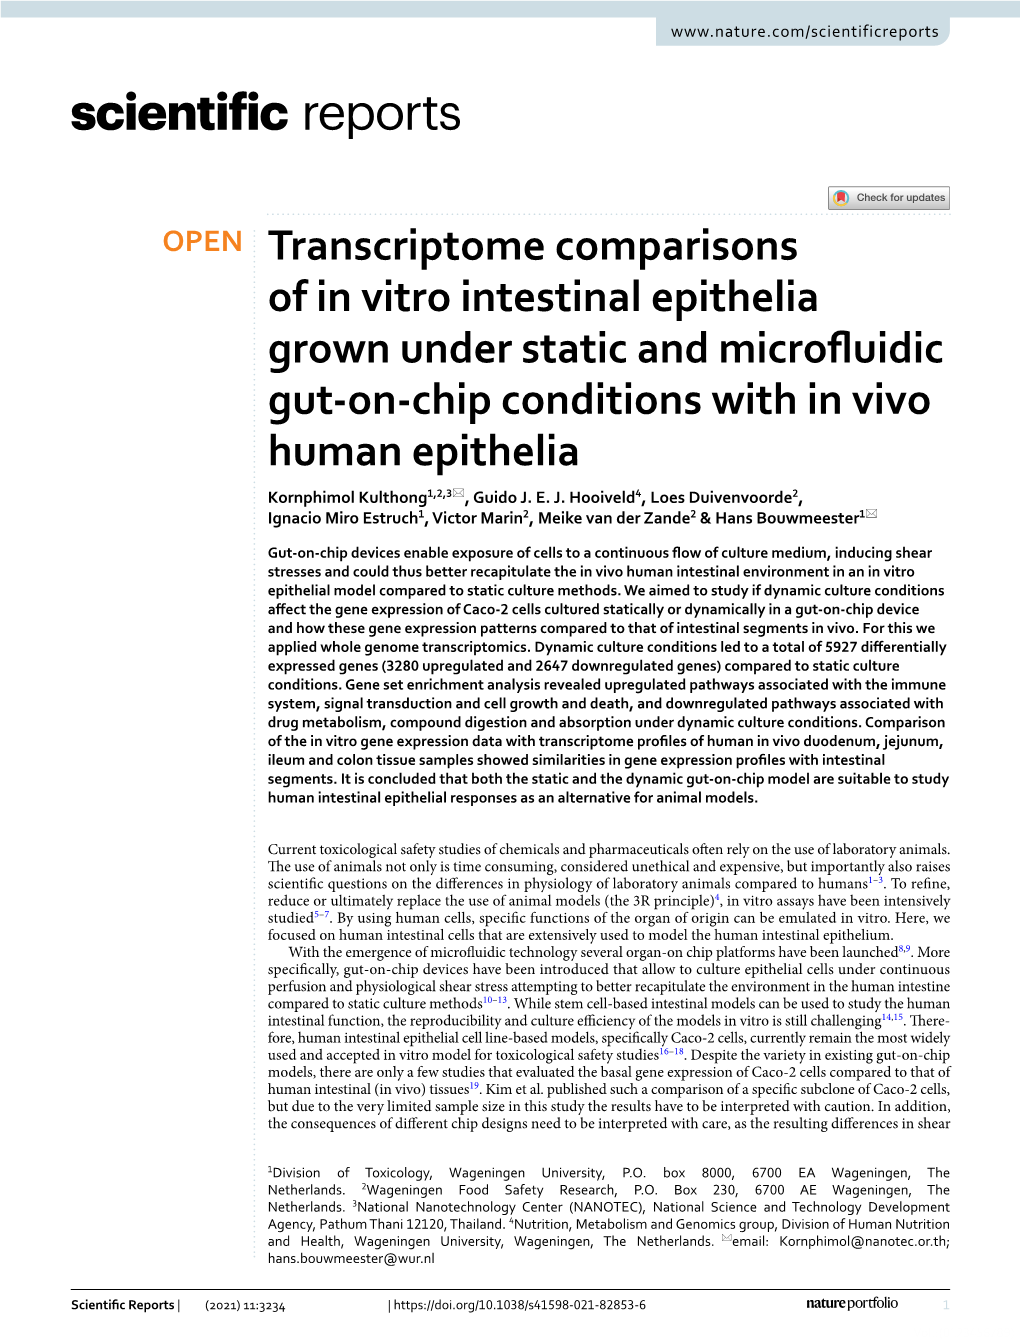 Transcriptome Comparisons of in Vitro Intestinal Epithelia Grown Under Static and Microfluidic Gut-On-Chip Conditions with in Vi